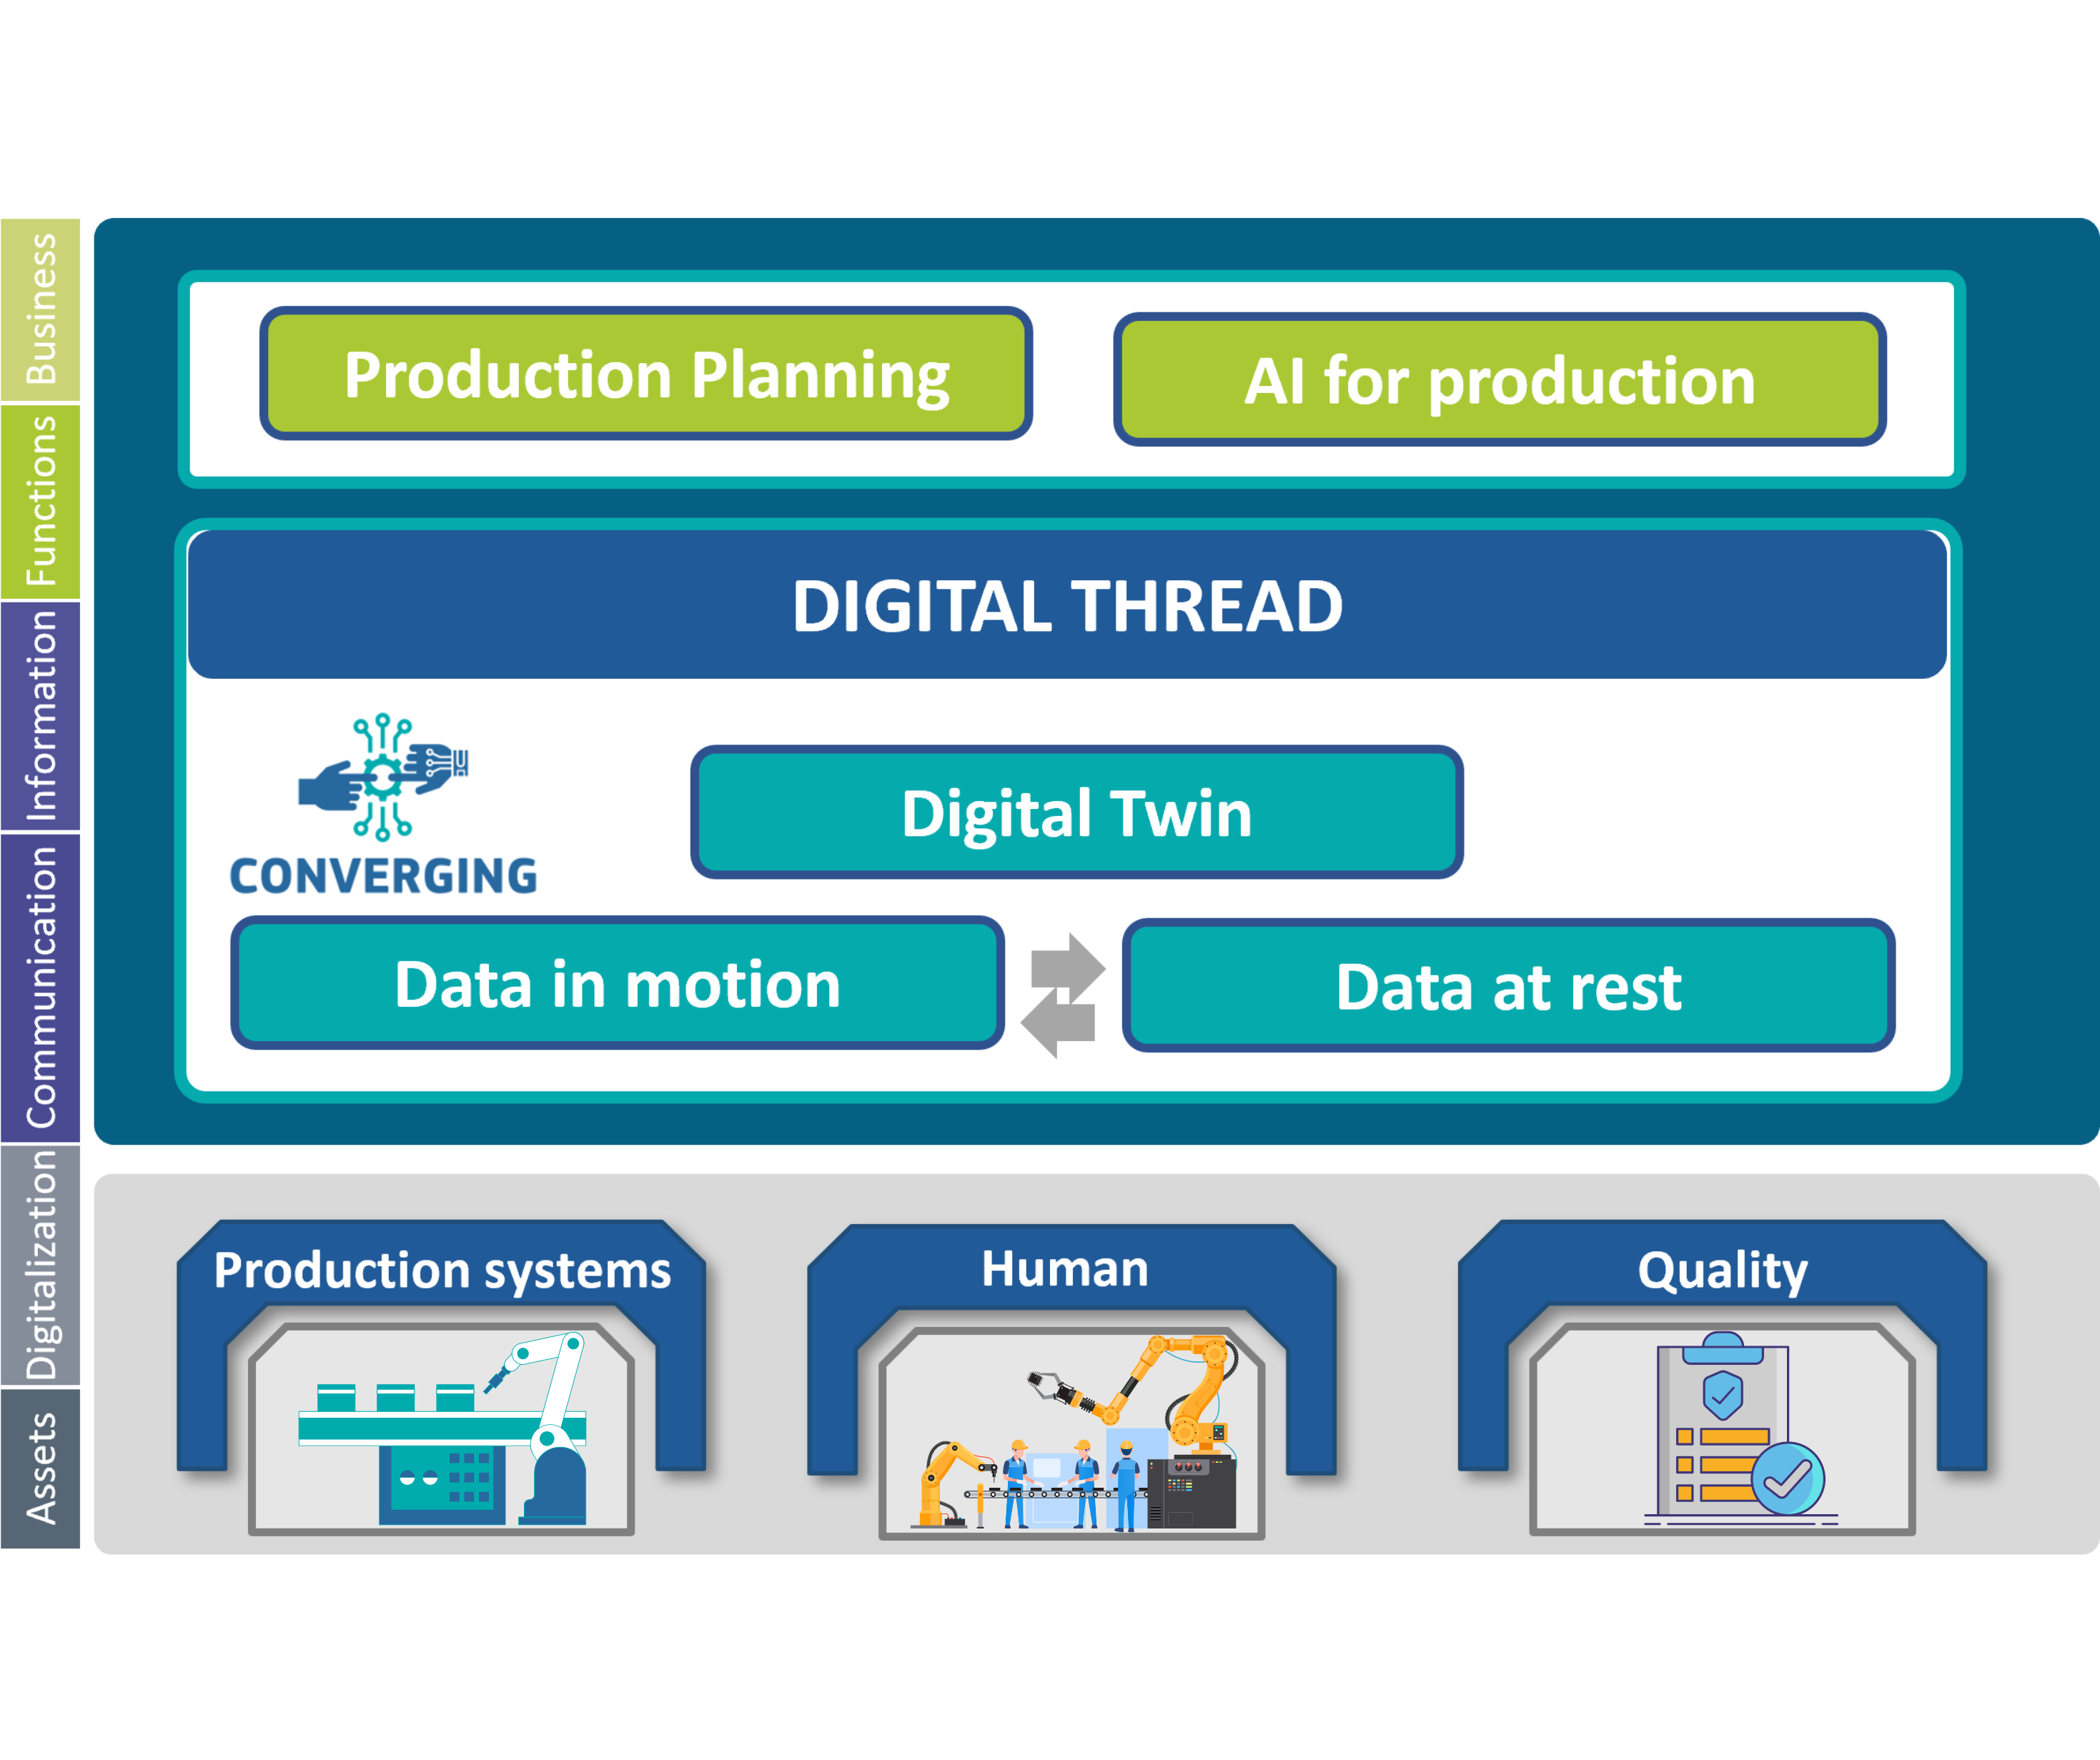 CONVERGING - Digital pipeline for data orchestration and reconfigurable production systems